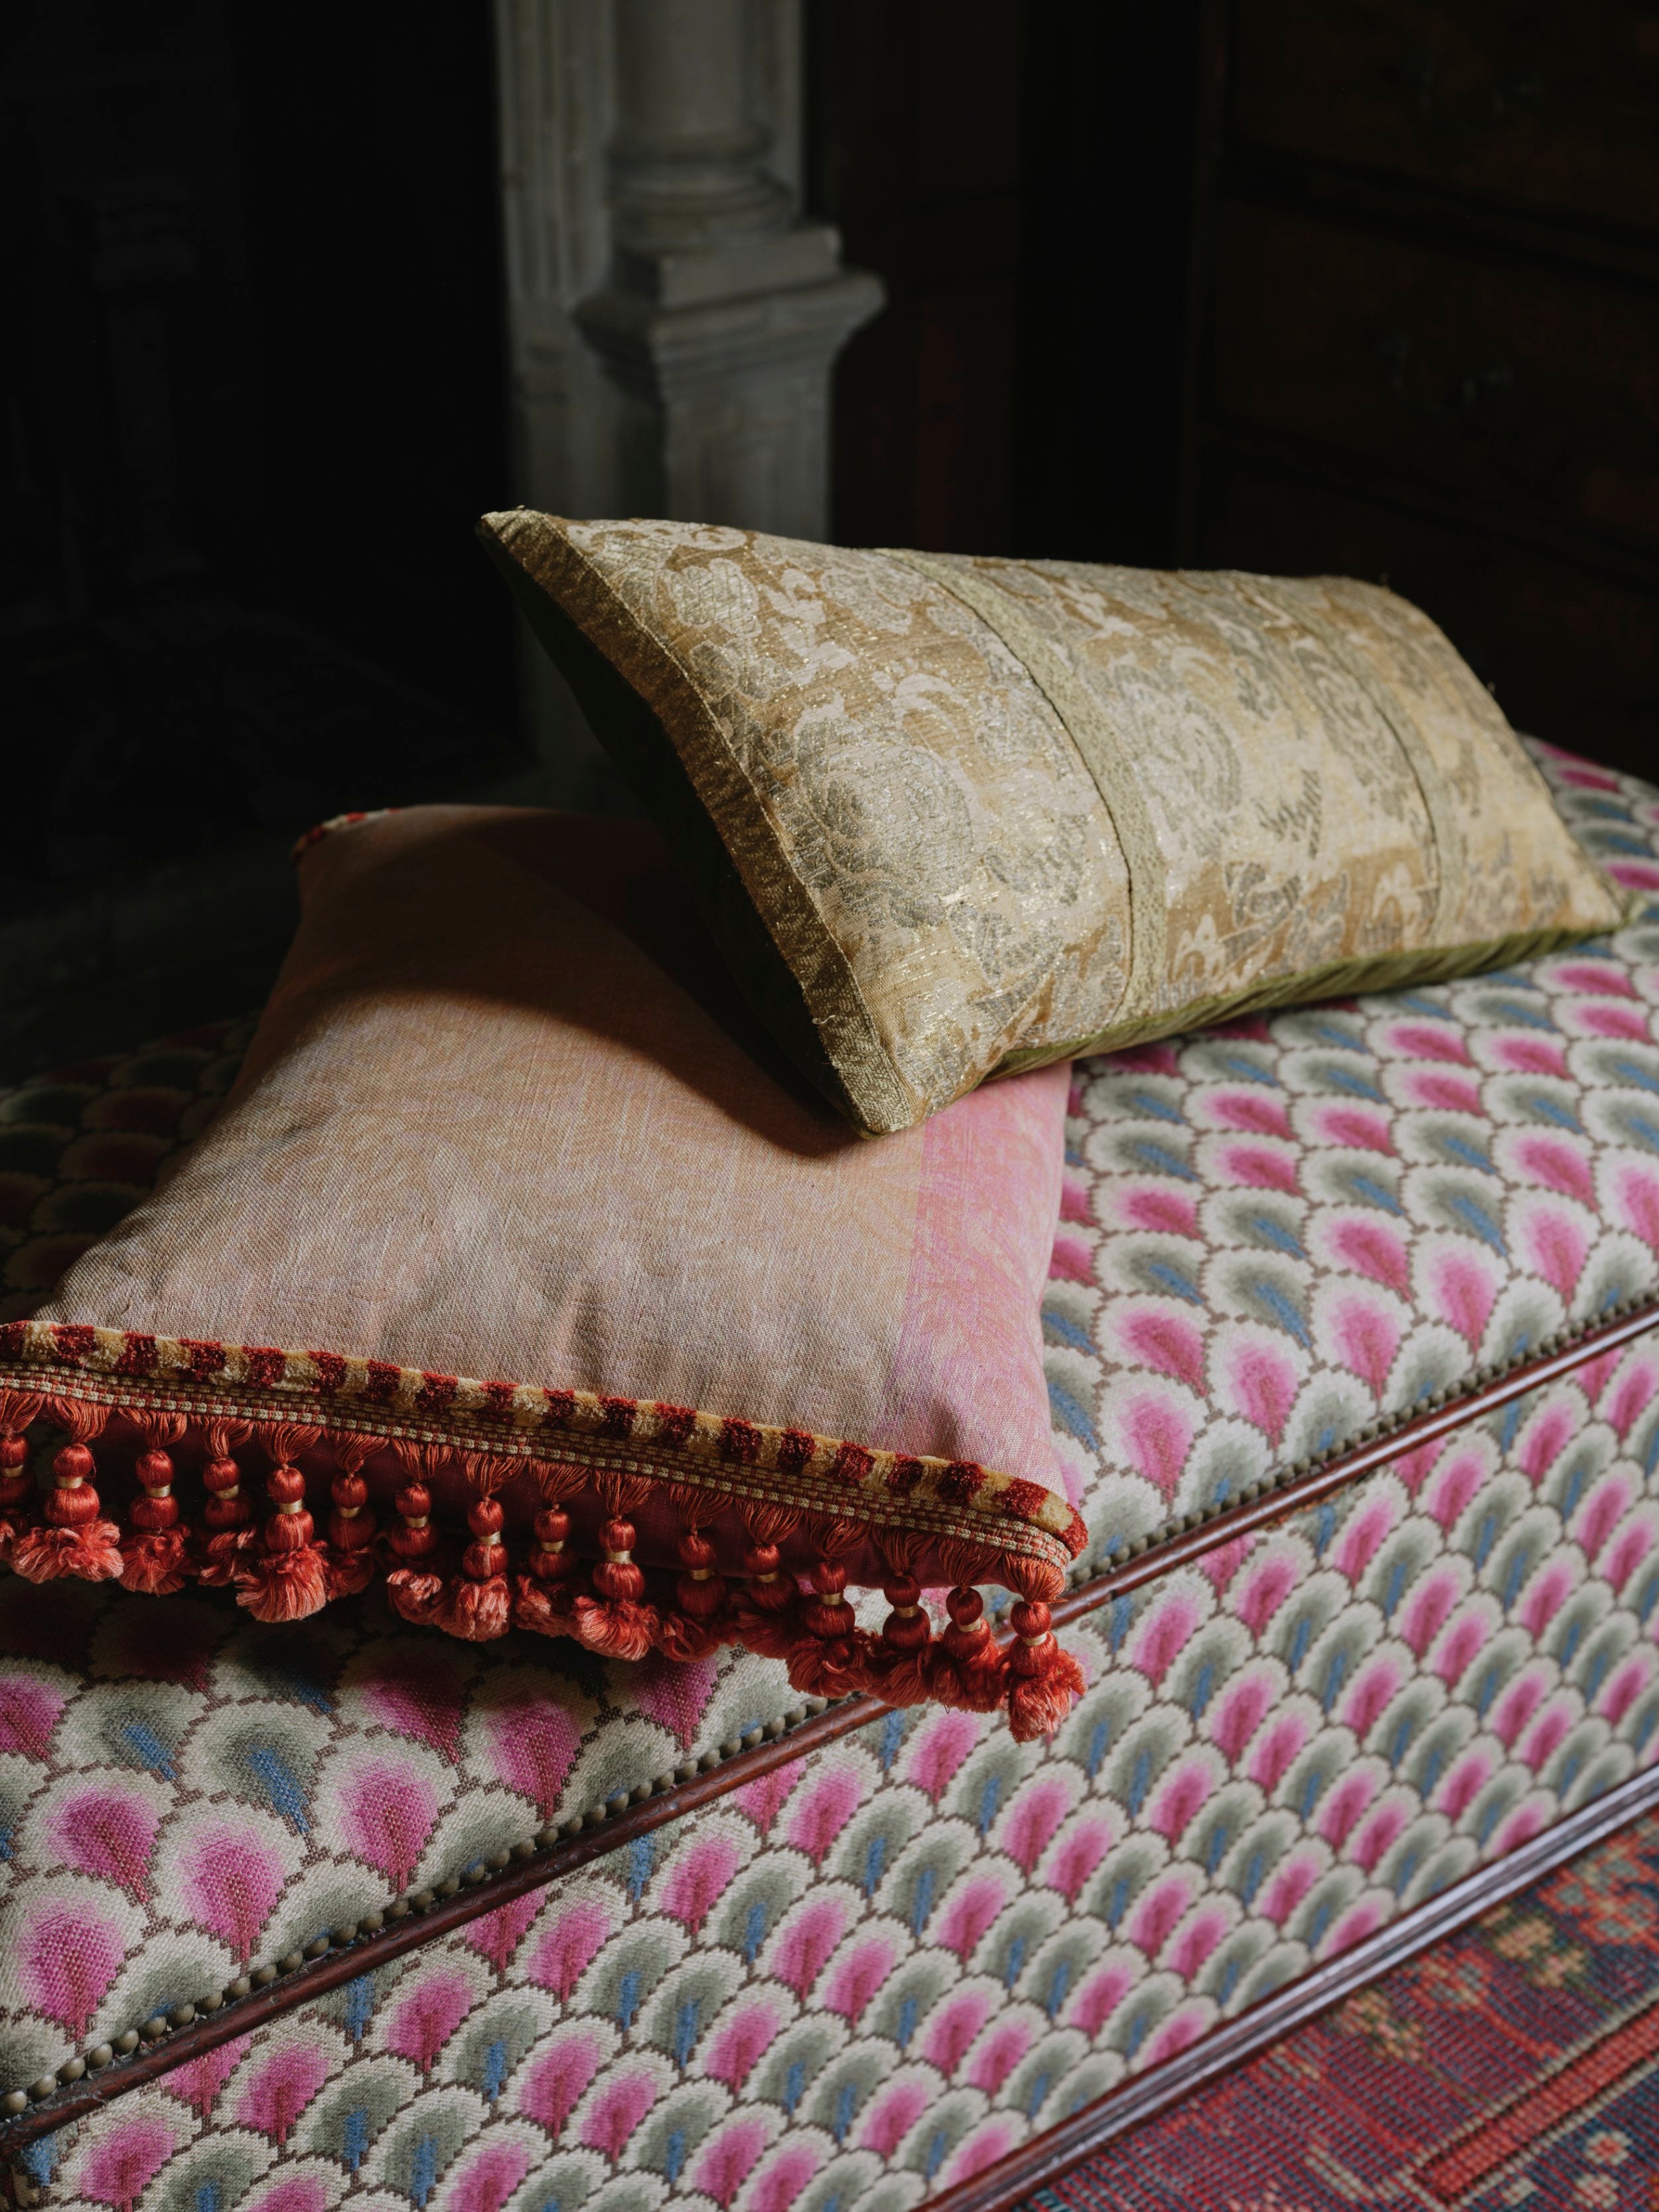 A Late 19th Century Mahogany Ottoman Upholstered in Flora Soames Walsingham Weave with Close Studding